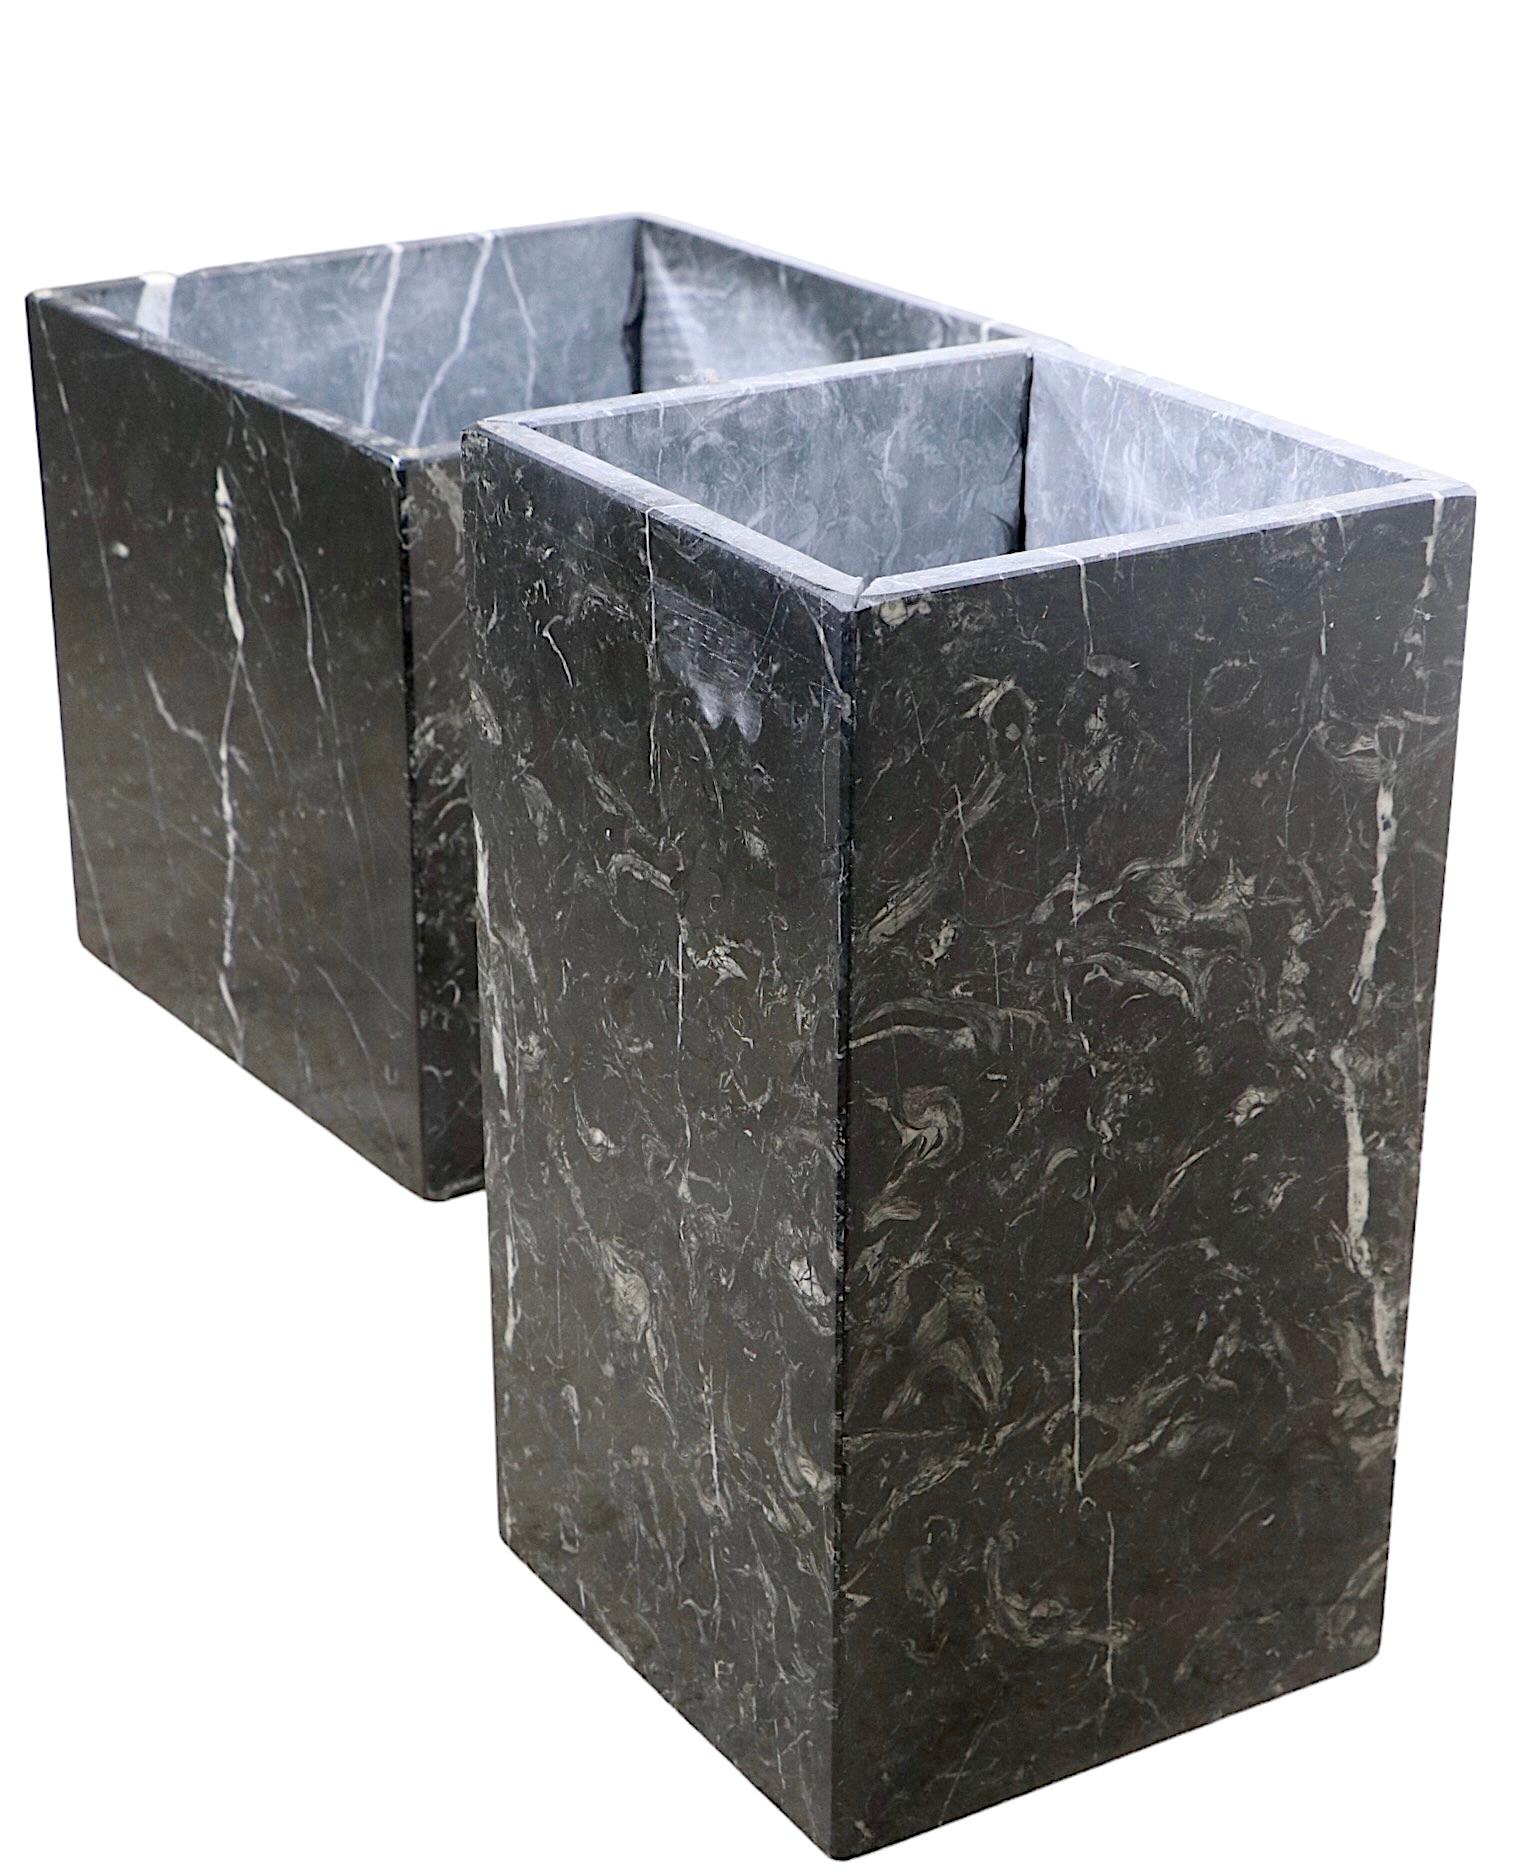 2 Black Marble Pedestal Bases Planters Table Bases c 1960/1970's For Sale 2